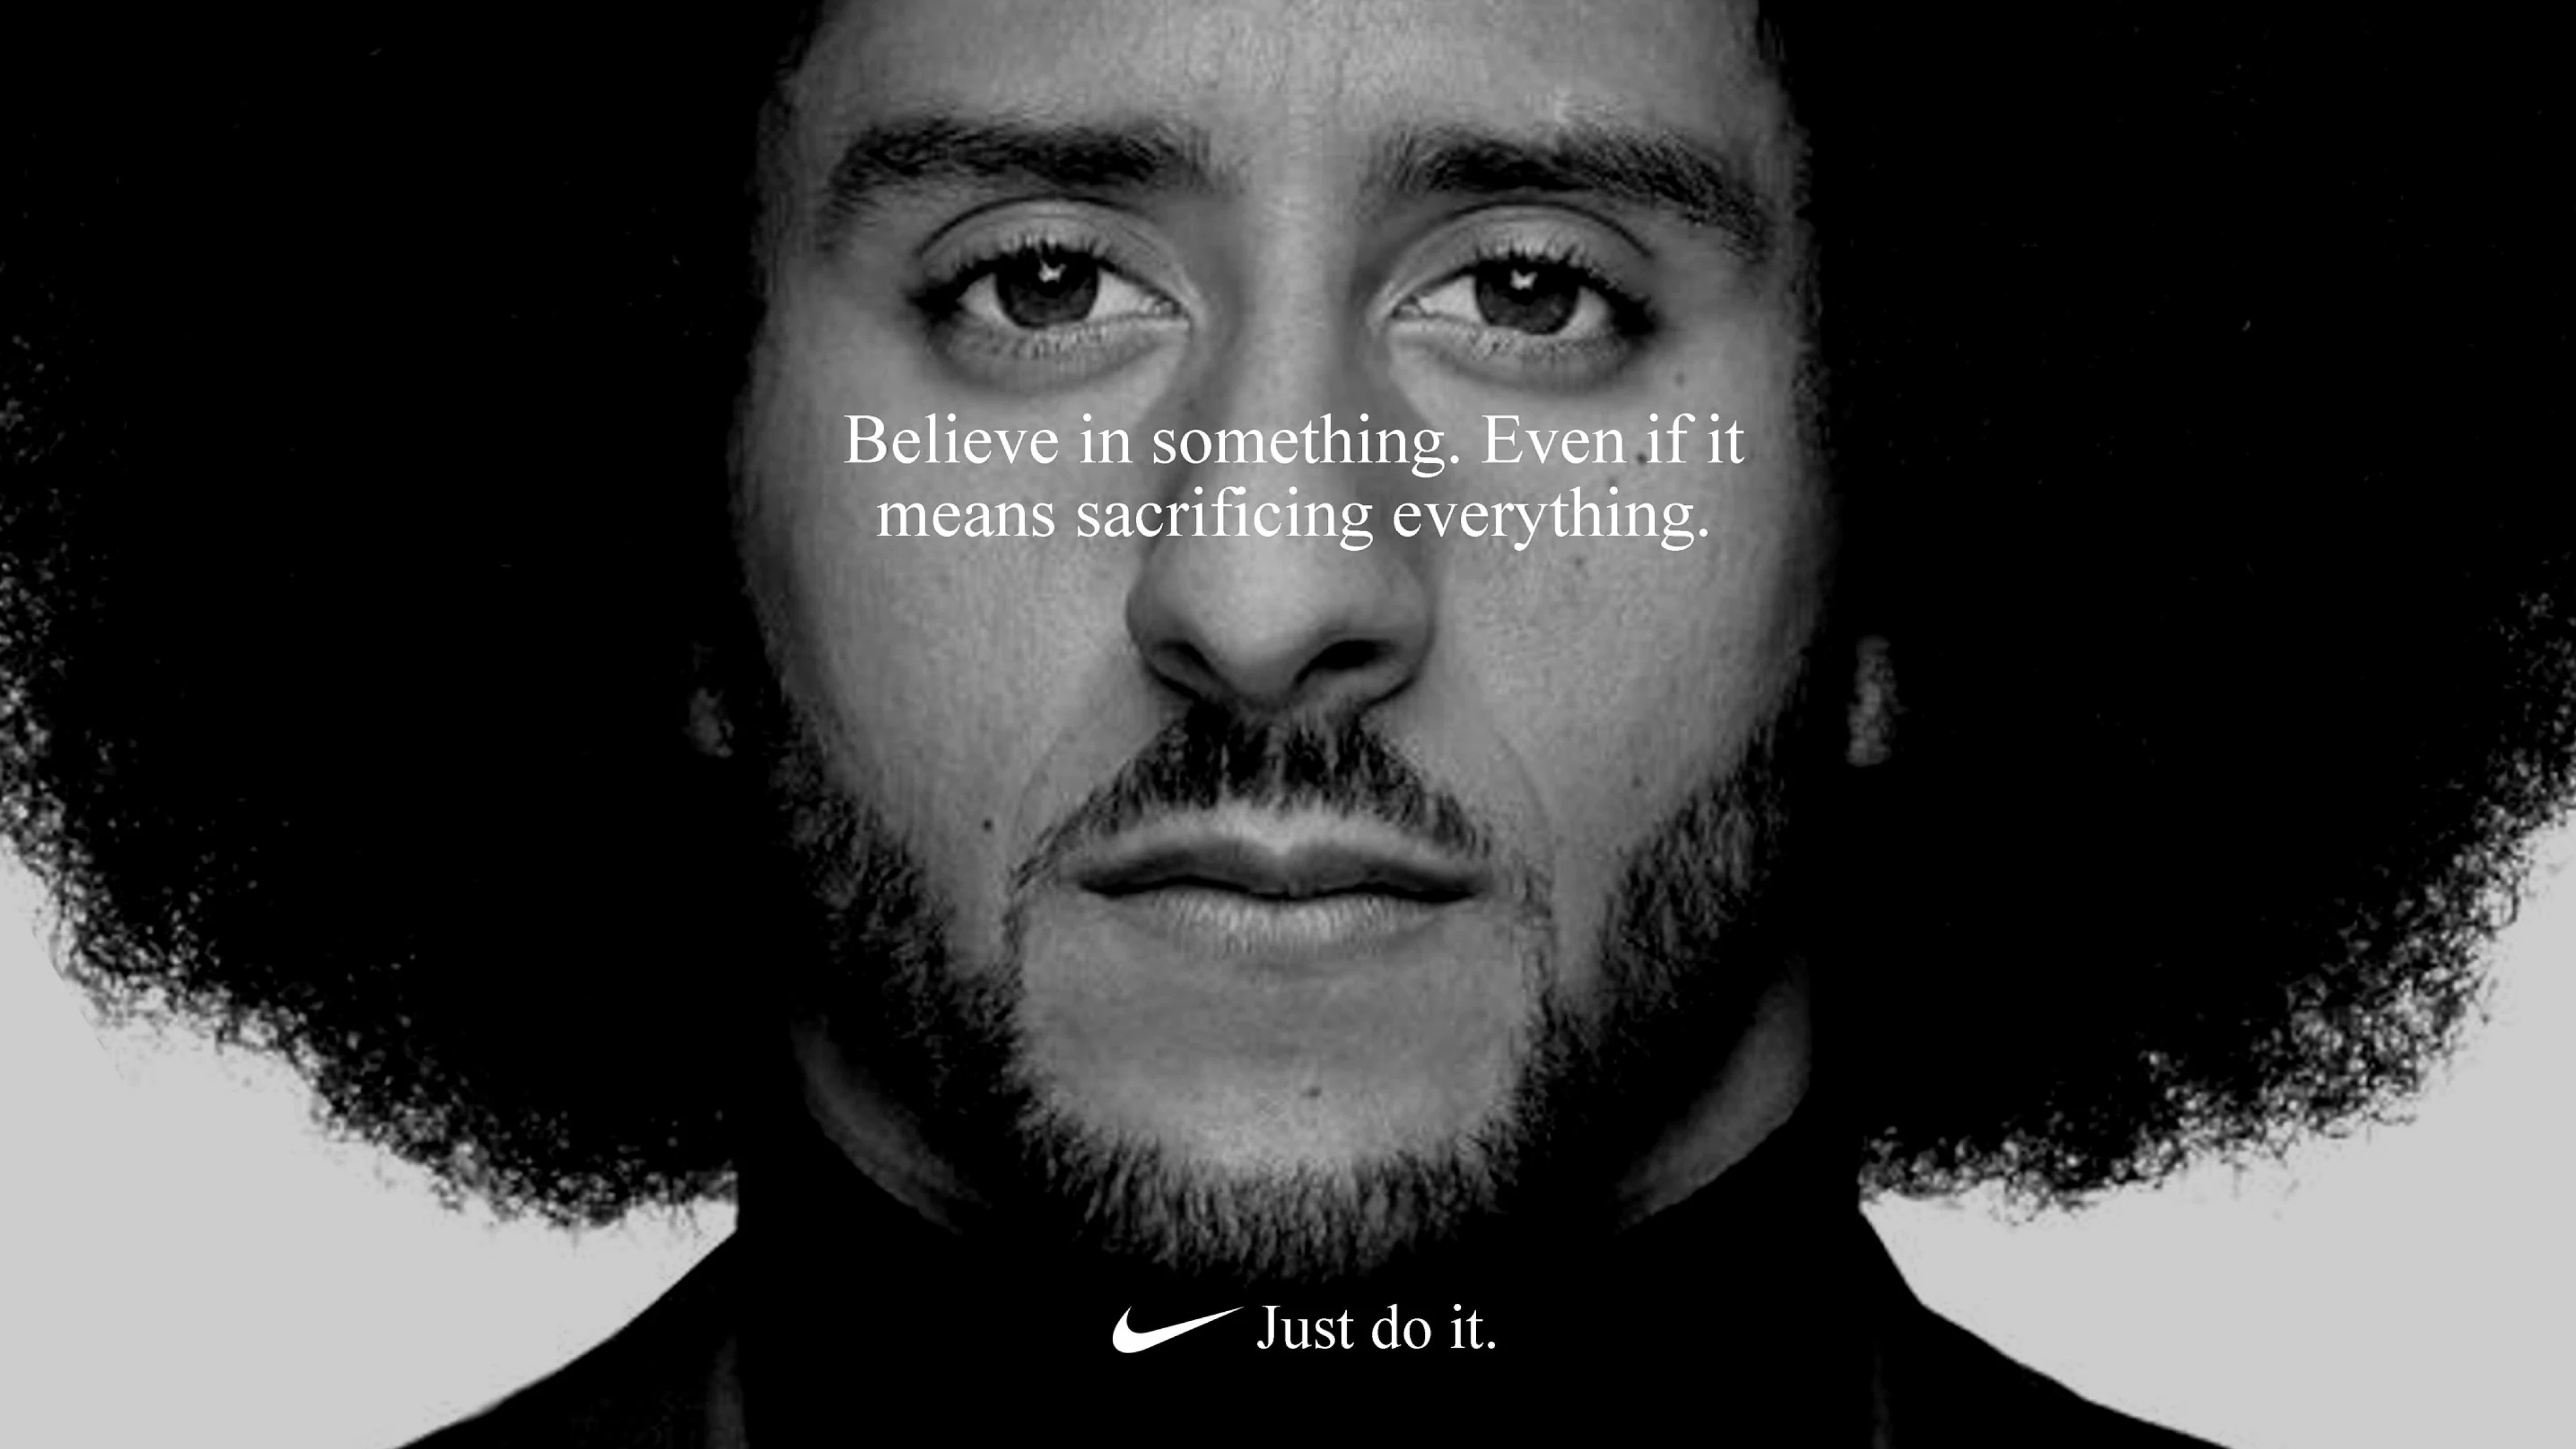 Nike Exemplifies Do It” With Colin Kaepernick Campaign